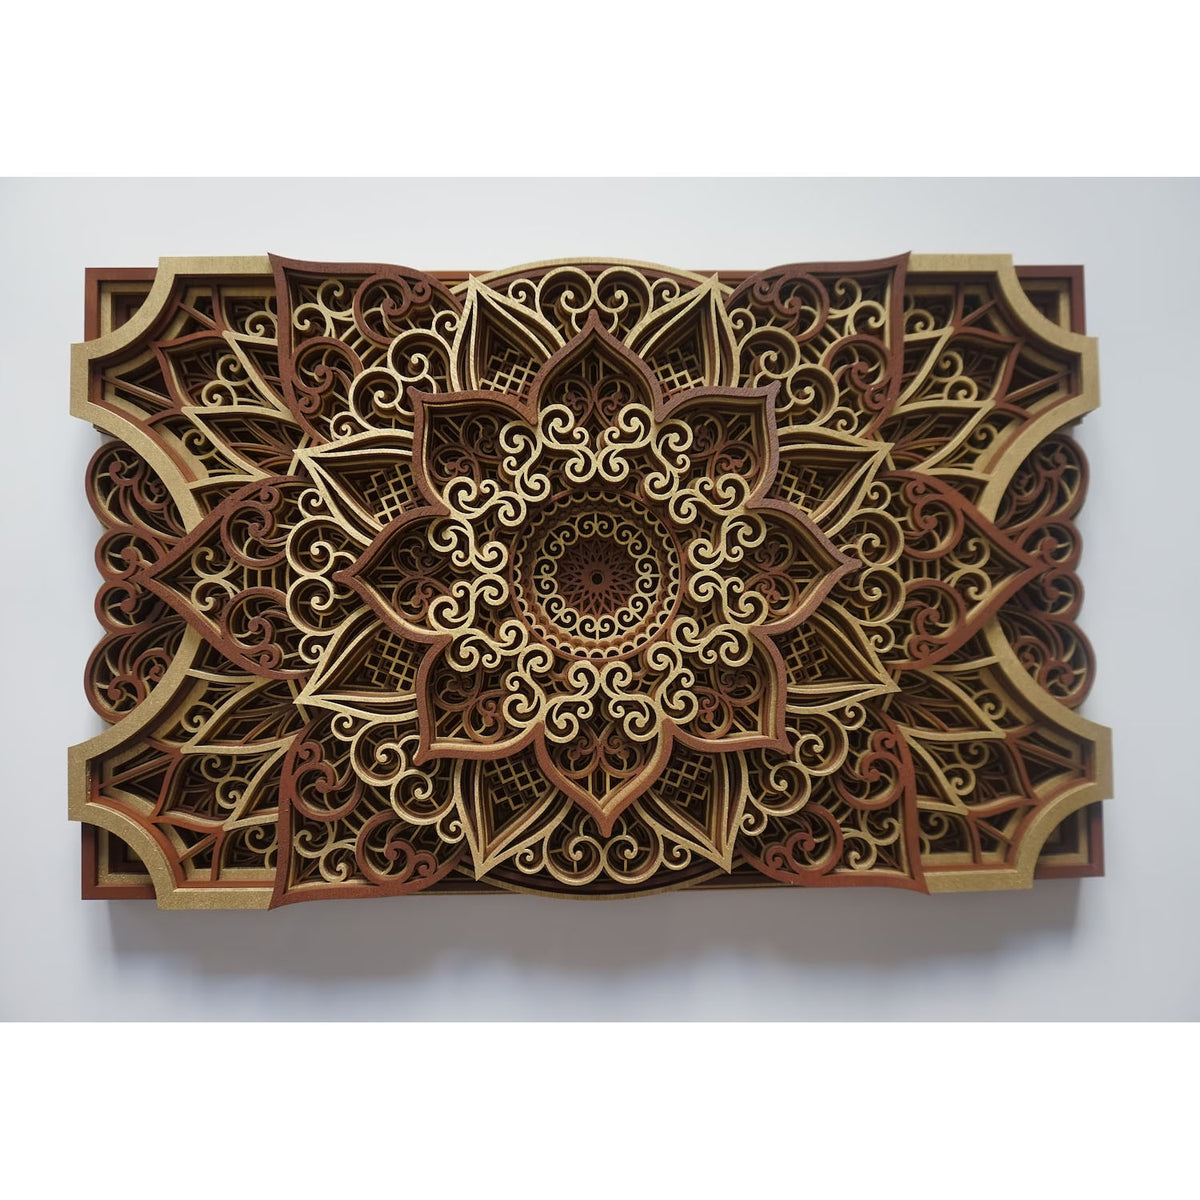 Osax Handcrafted Wooden Wall Decor - Brown/Gold - Notbrand